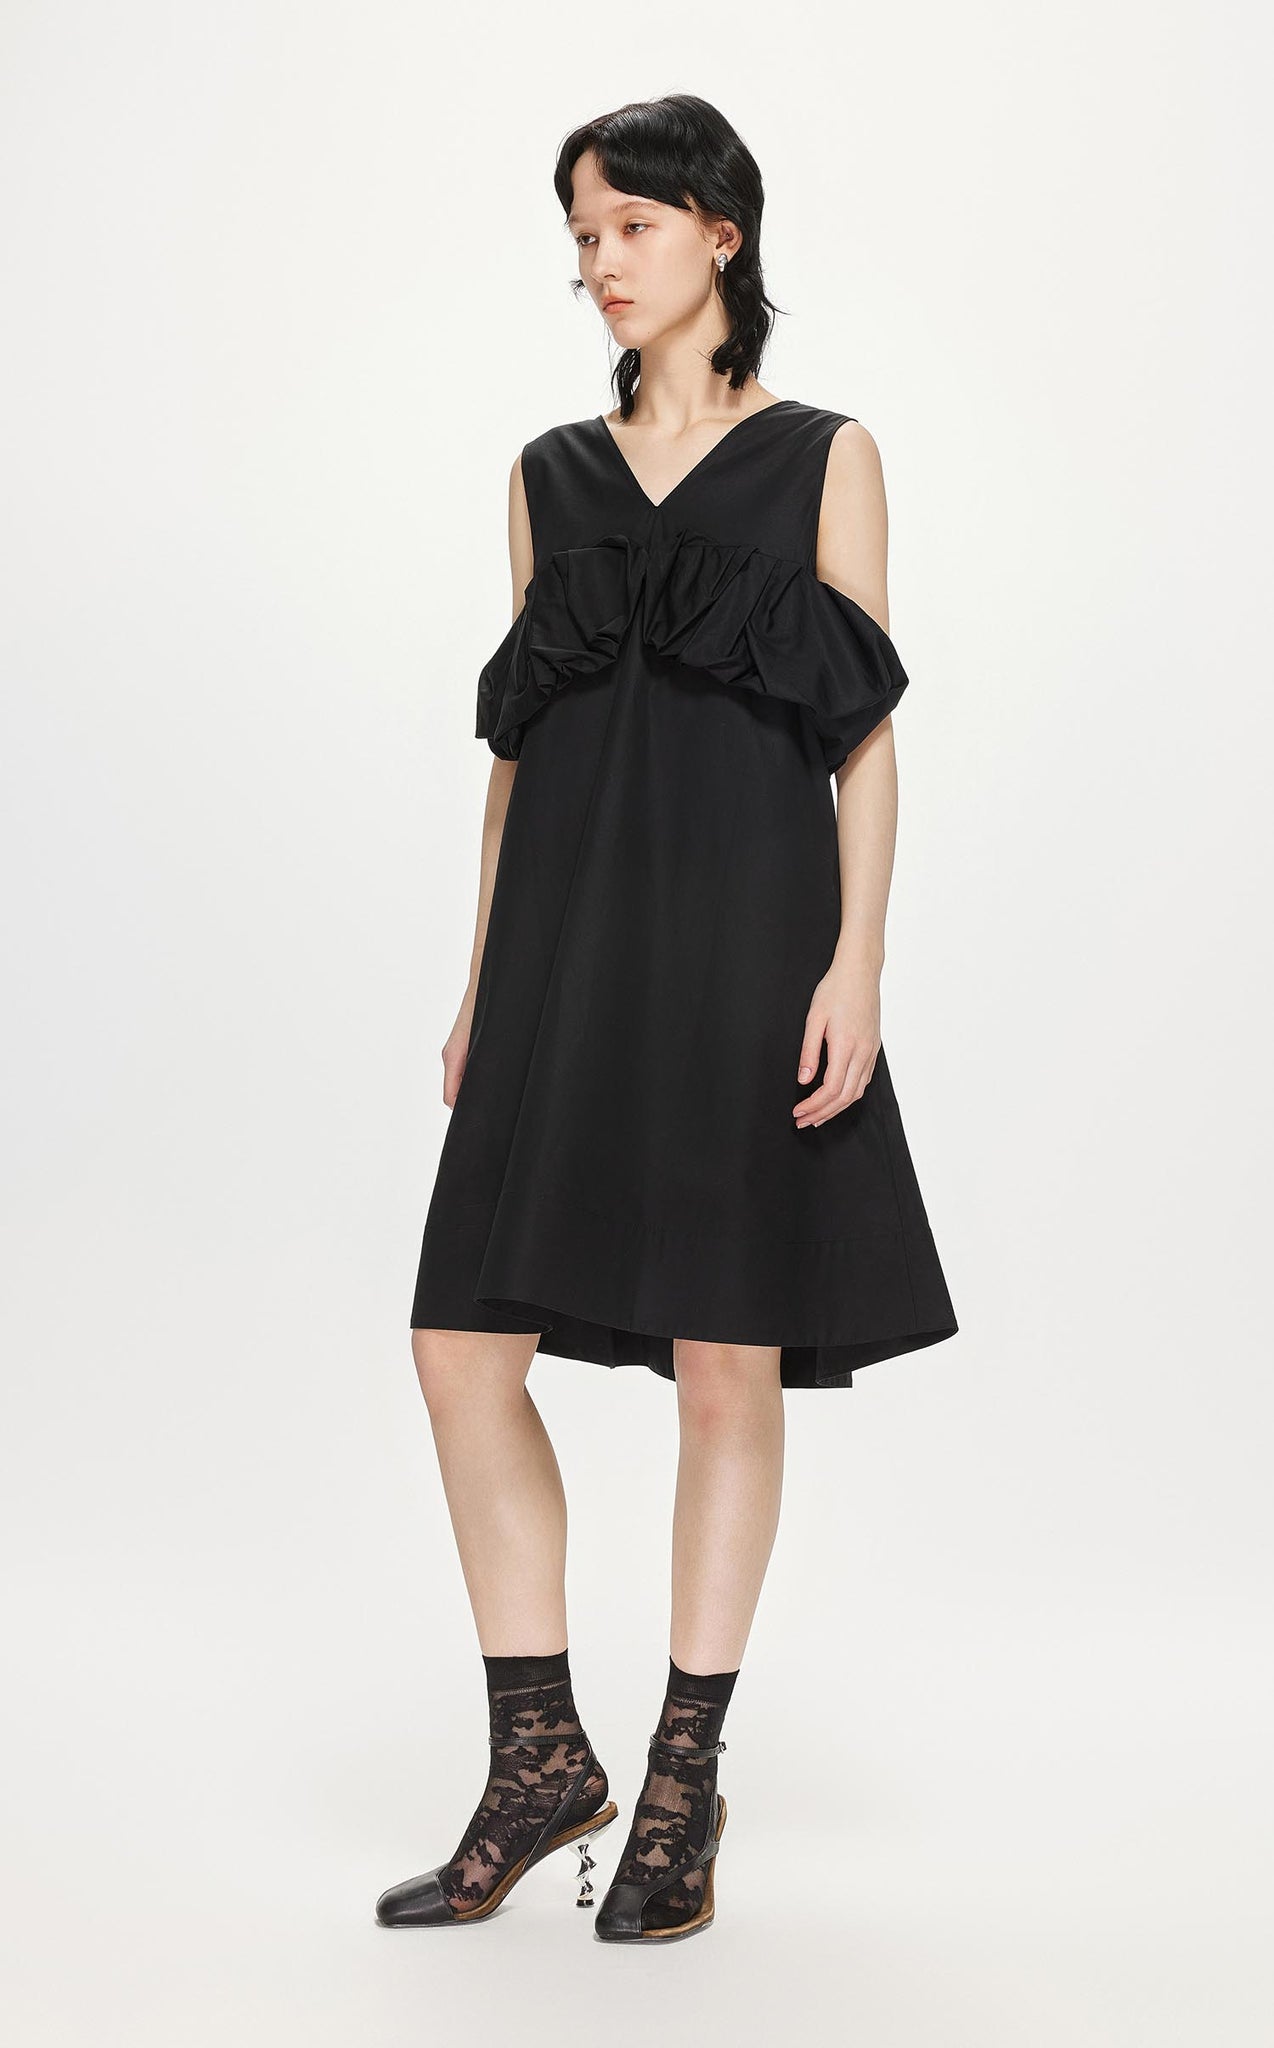 Dresses / JNBY Solid A-Line Sleeveless Dress (100% Cotton)